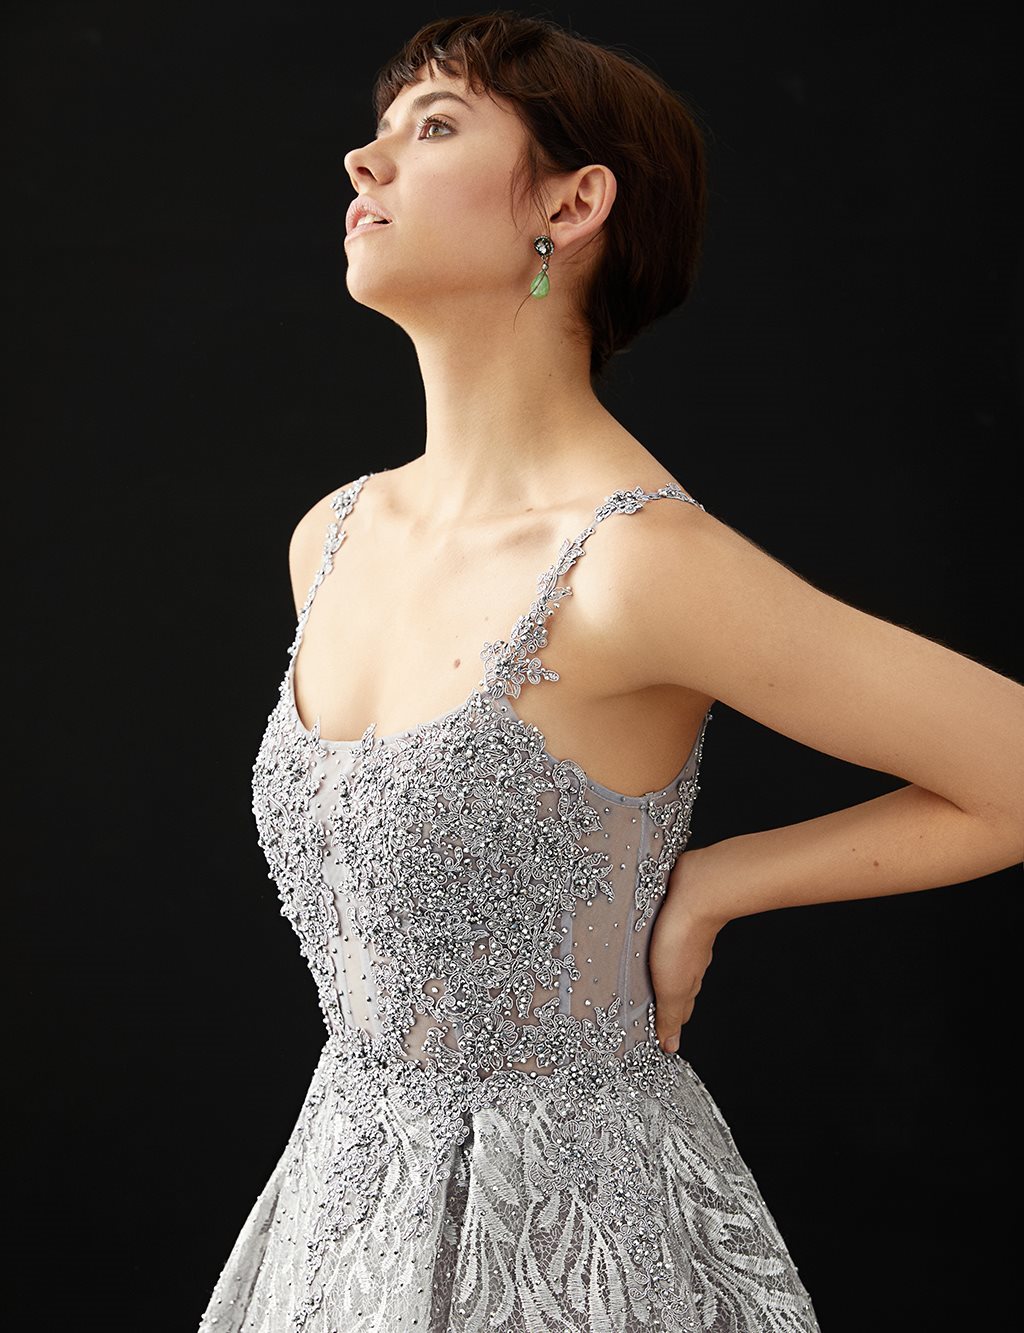 TIARA Guipure and Stone Embellished Suspended Evening Dress Lilac